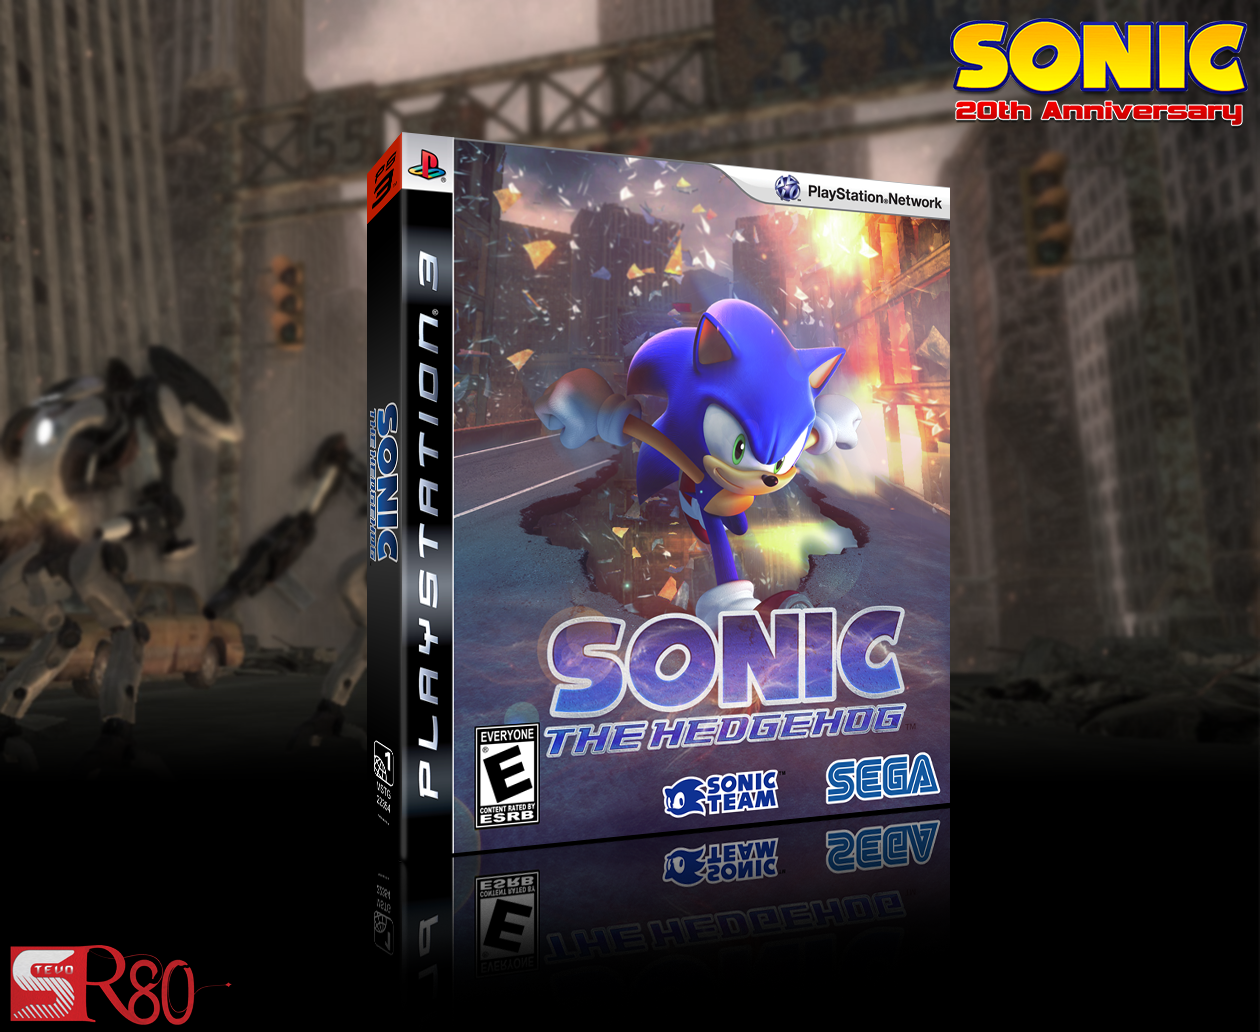 Sonic The Hedgehog 2006 box cover